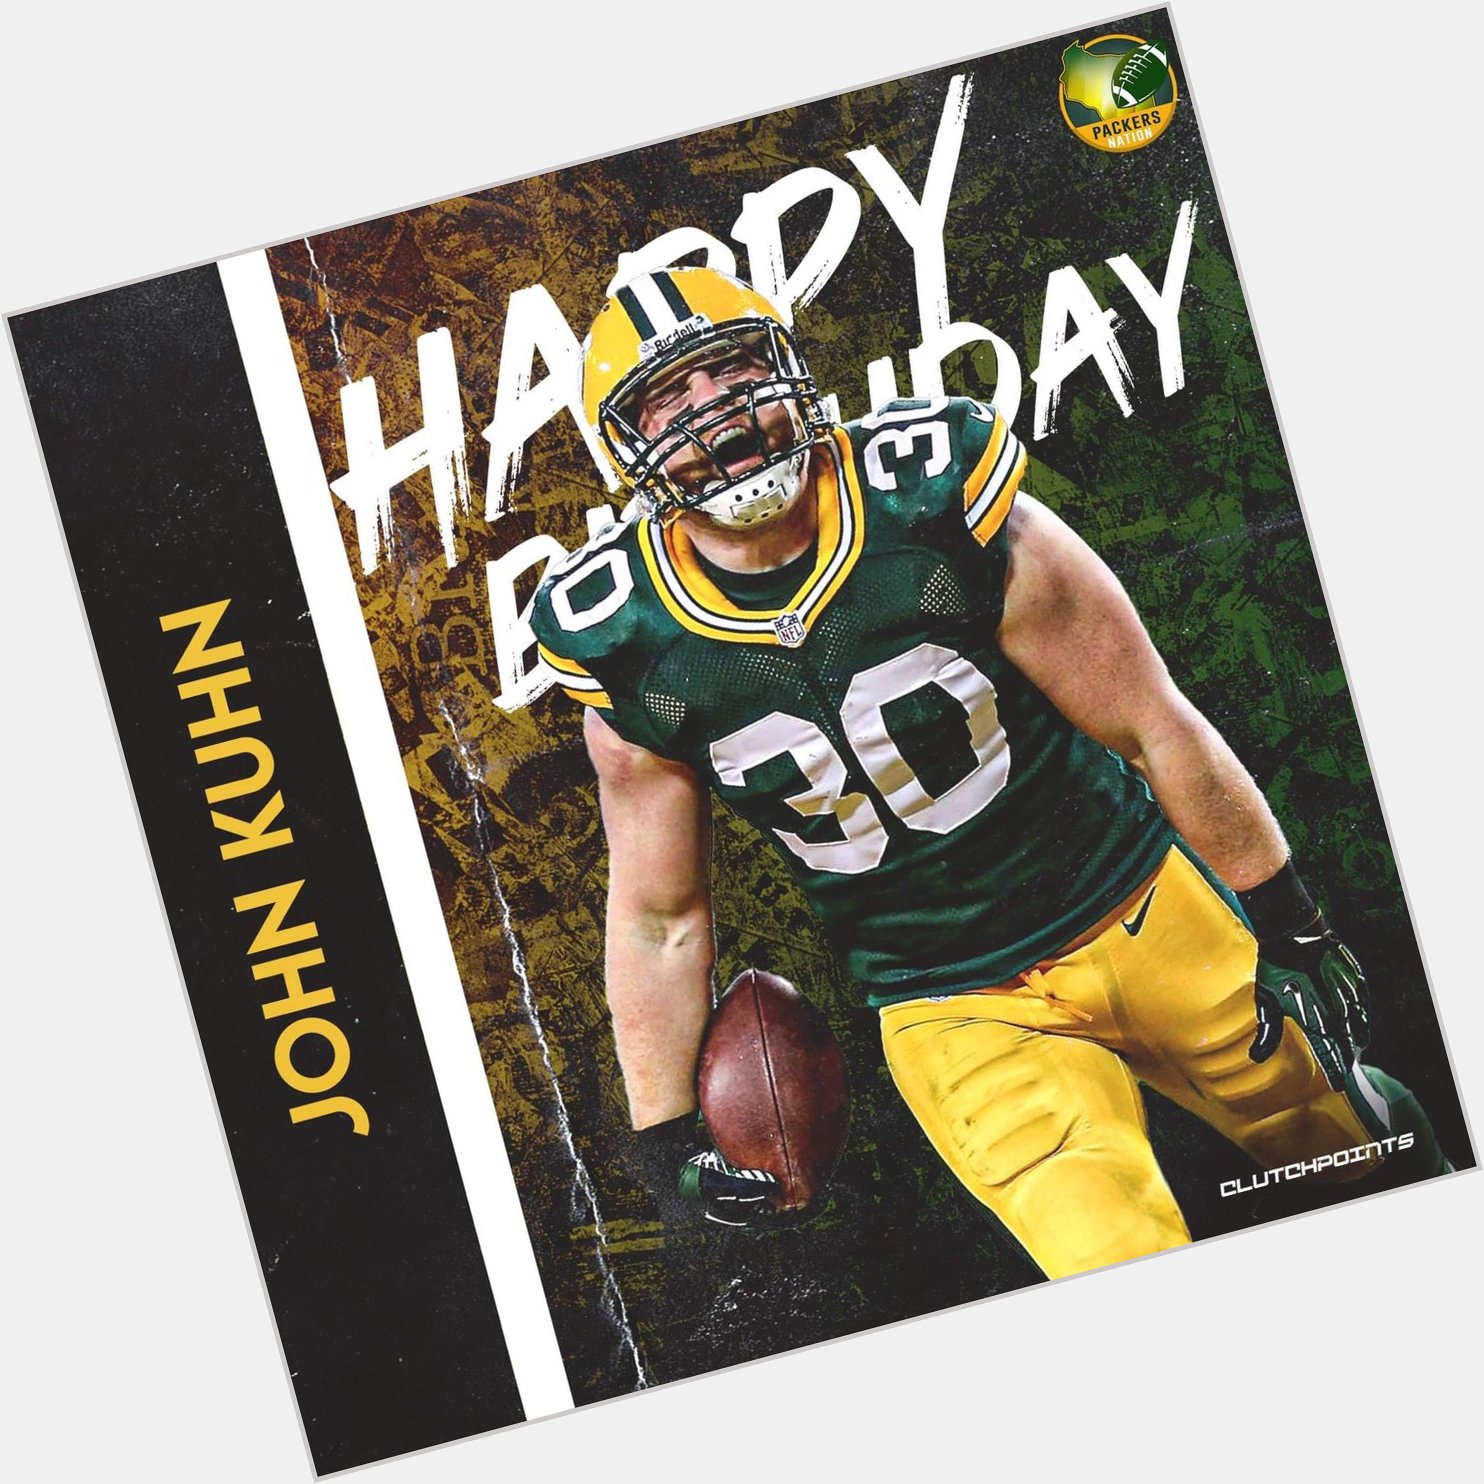 Join Packers Nation in greeting former 3x Pro Bowler and Super Bowl Champ, John Kuhn, with a happy 39th birthday!  